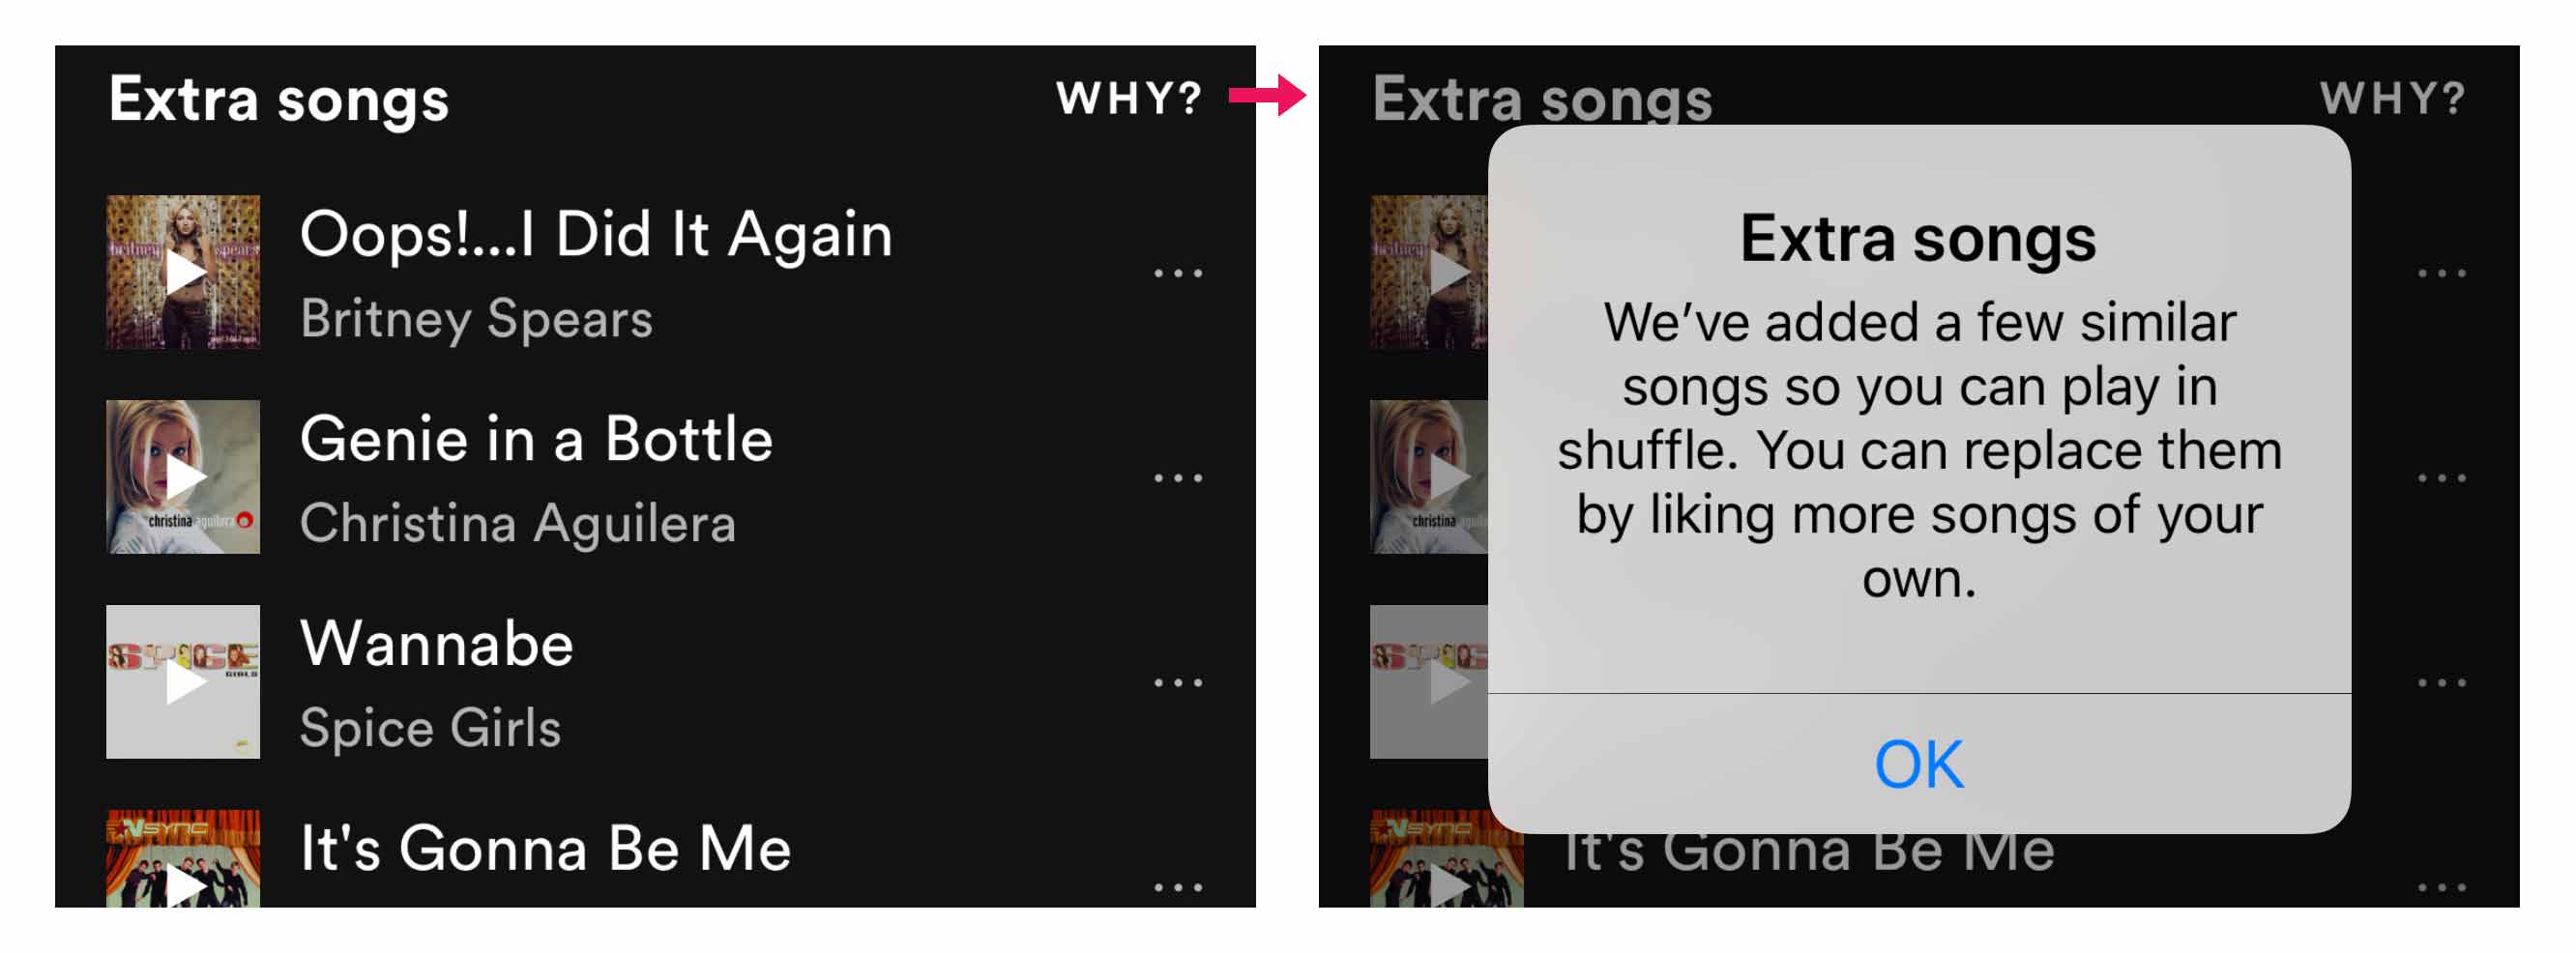 Screenshots of Spotify's suggested extra songs